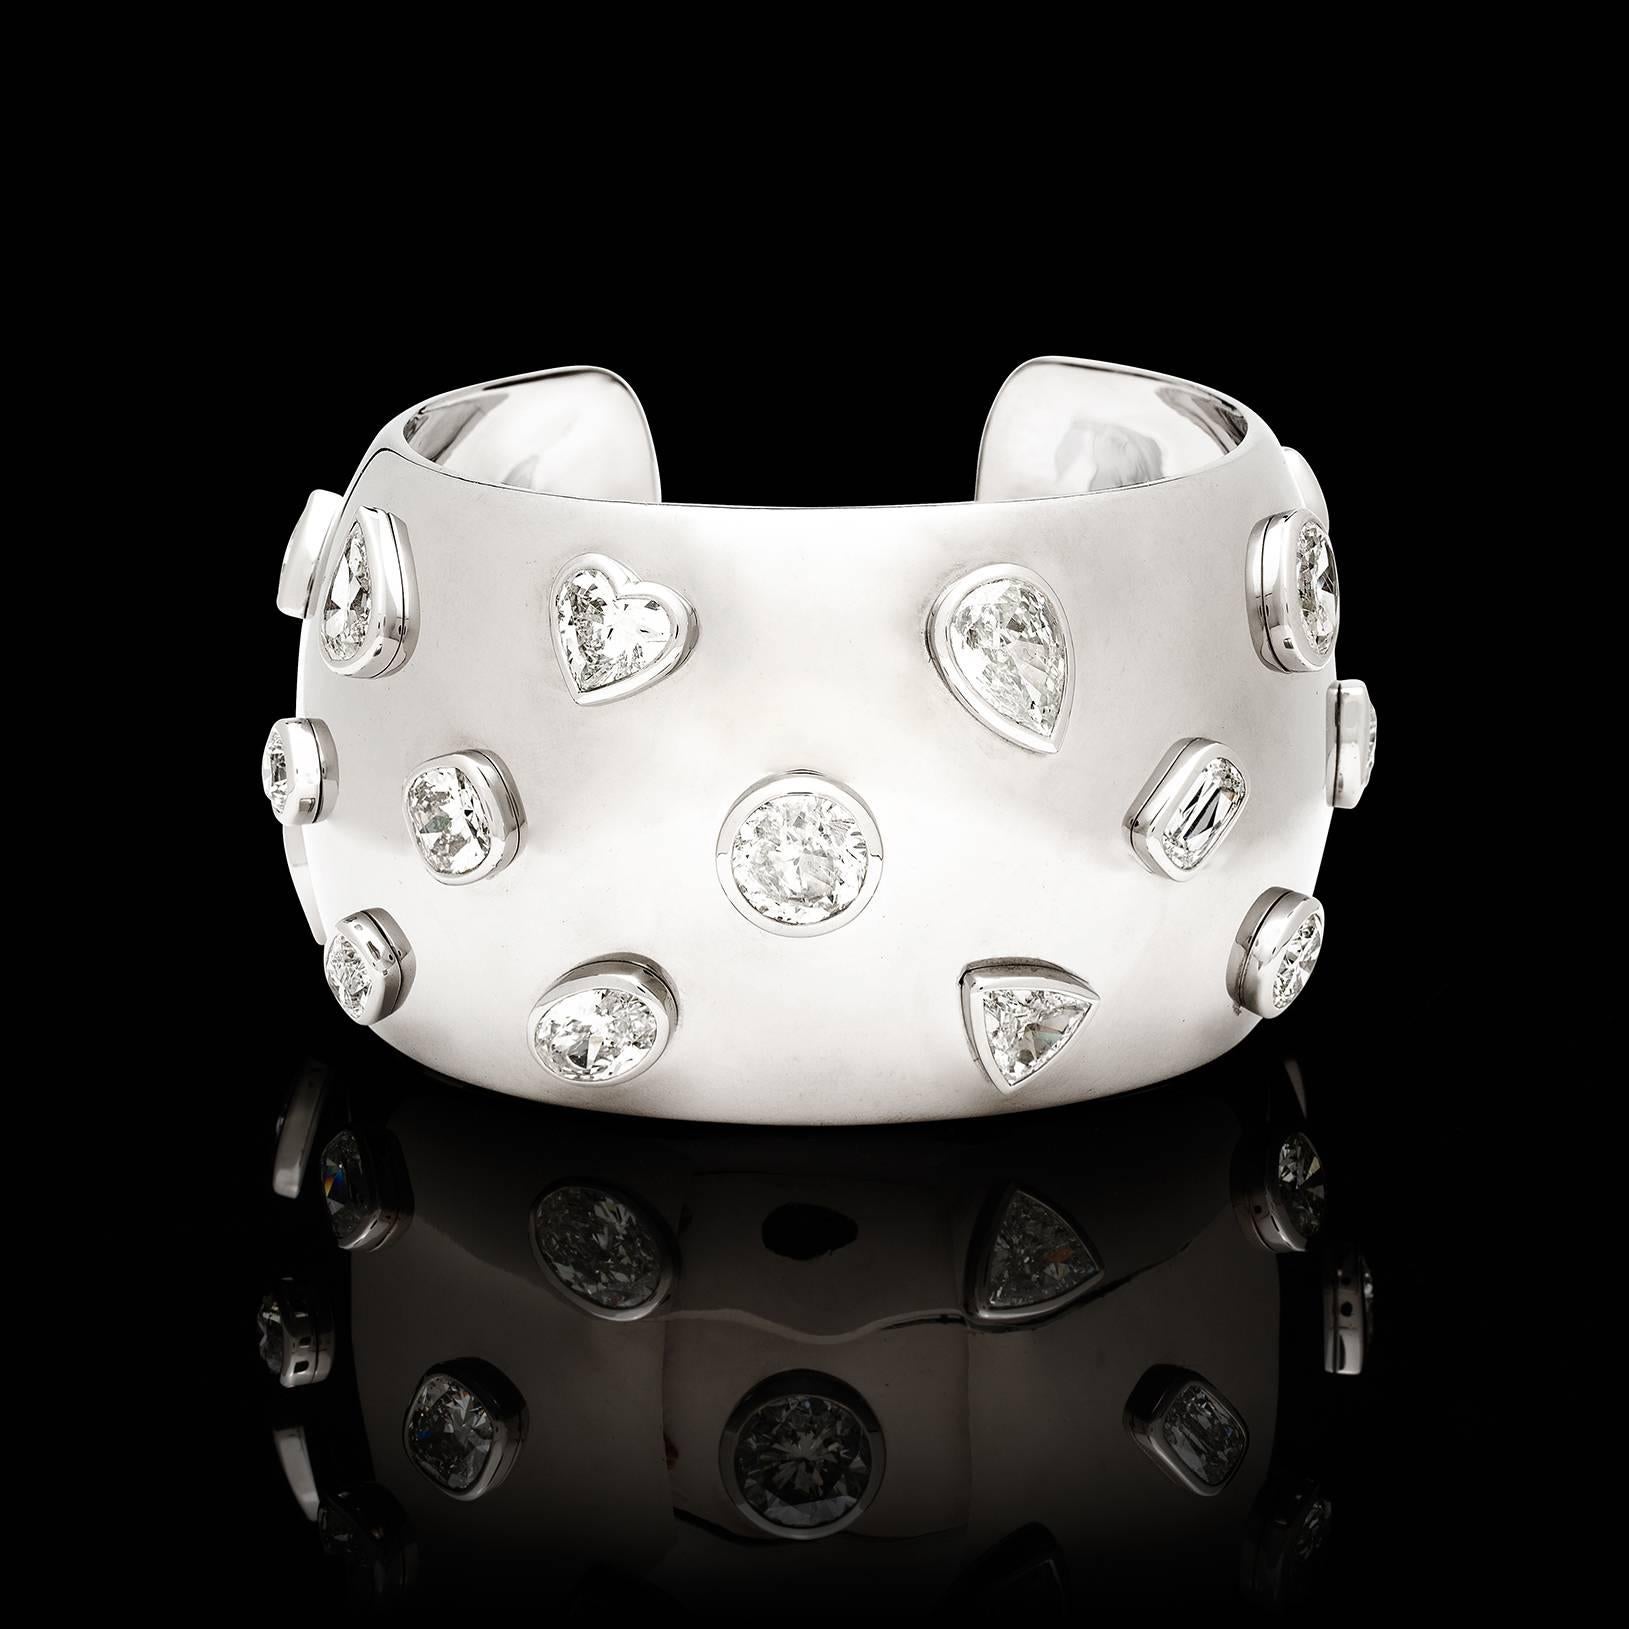 This wide, palladium cuff bracelet adorned with 20 various bezel-set fancy and round brilliant-cut diamonds, weighing in total 27.93 carats, is a one-of-a-kind showstopper! The bracelet is 1 5/8 inches wide, and weighs 134.5 grams. Accompanied by 11